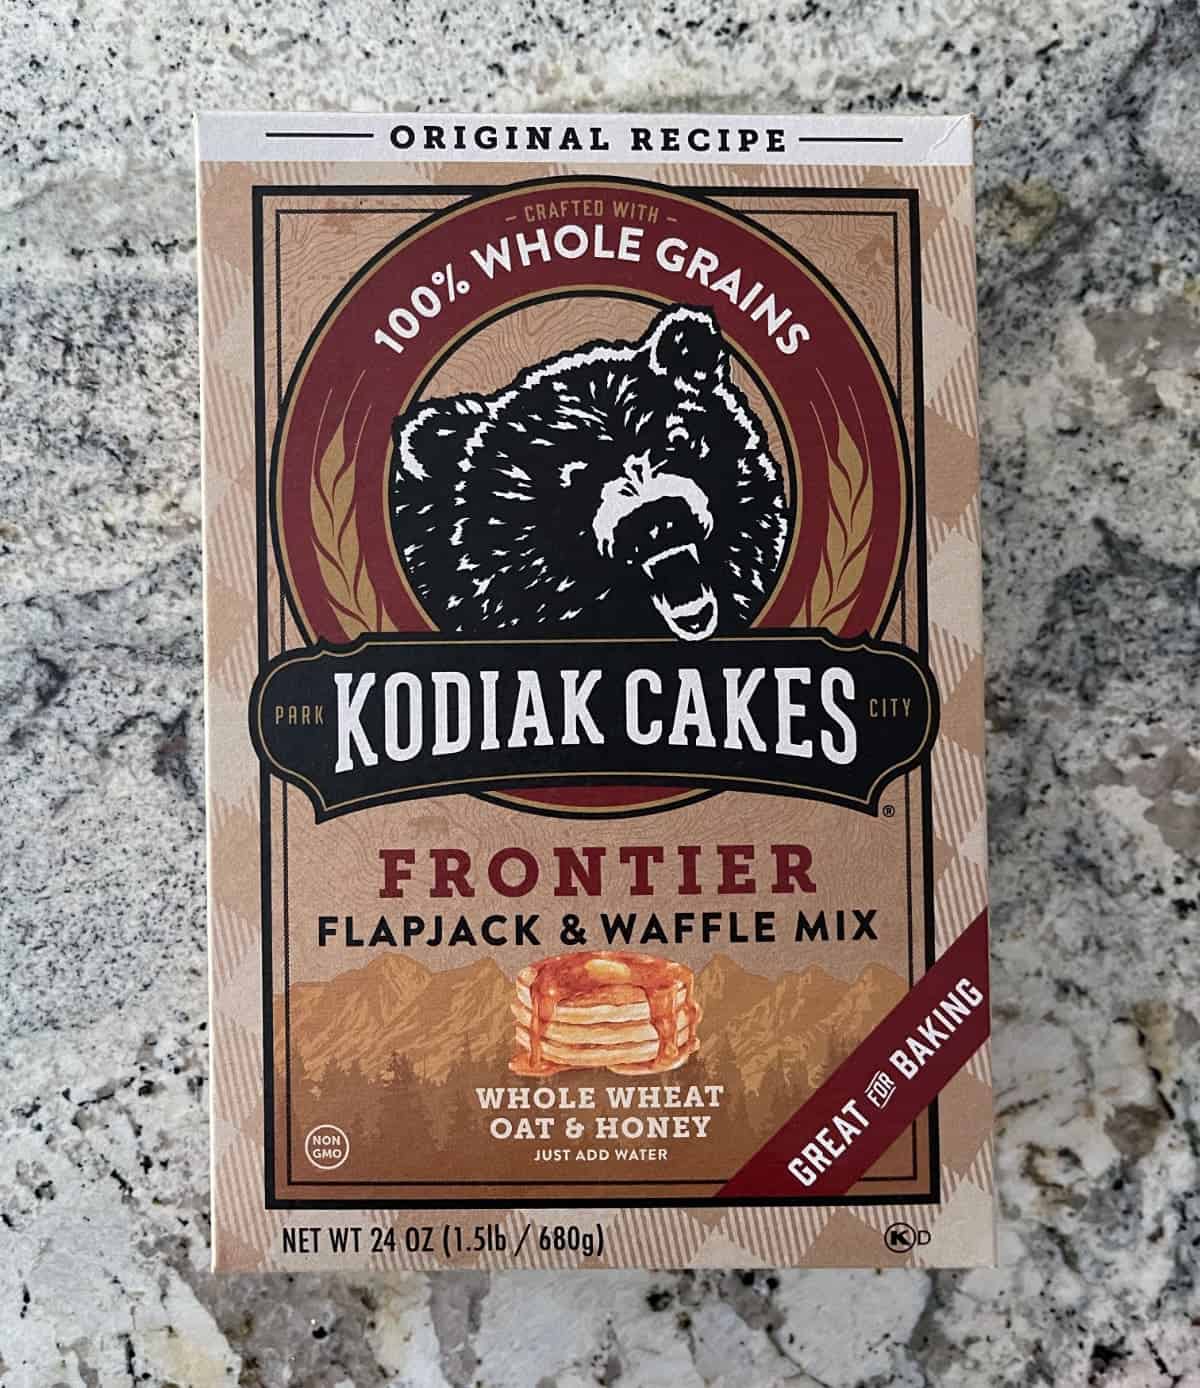 Box of Kodiak Cakes Frontier Flapjack and Waffle Mix with whole wheat, oat and honey on granite.